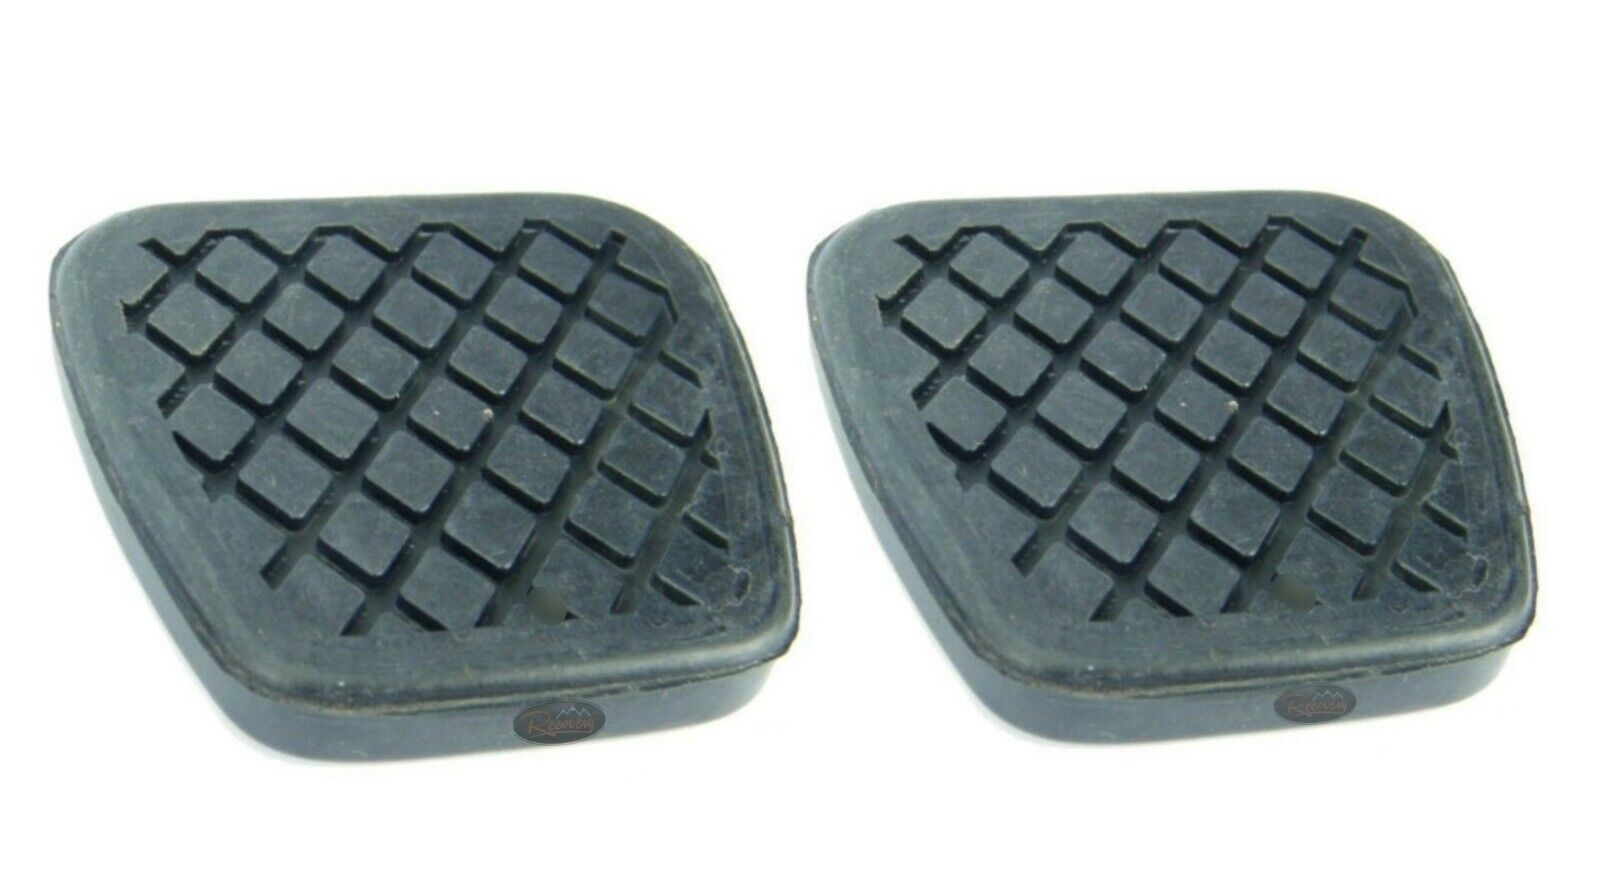 Rover MG MGF TF 1.6 1.8 – Brake & Clutch Pedal Rubber Kit – DBP7047L(2 ...